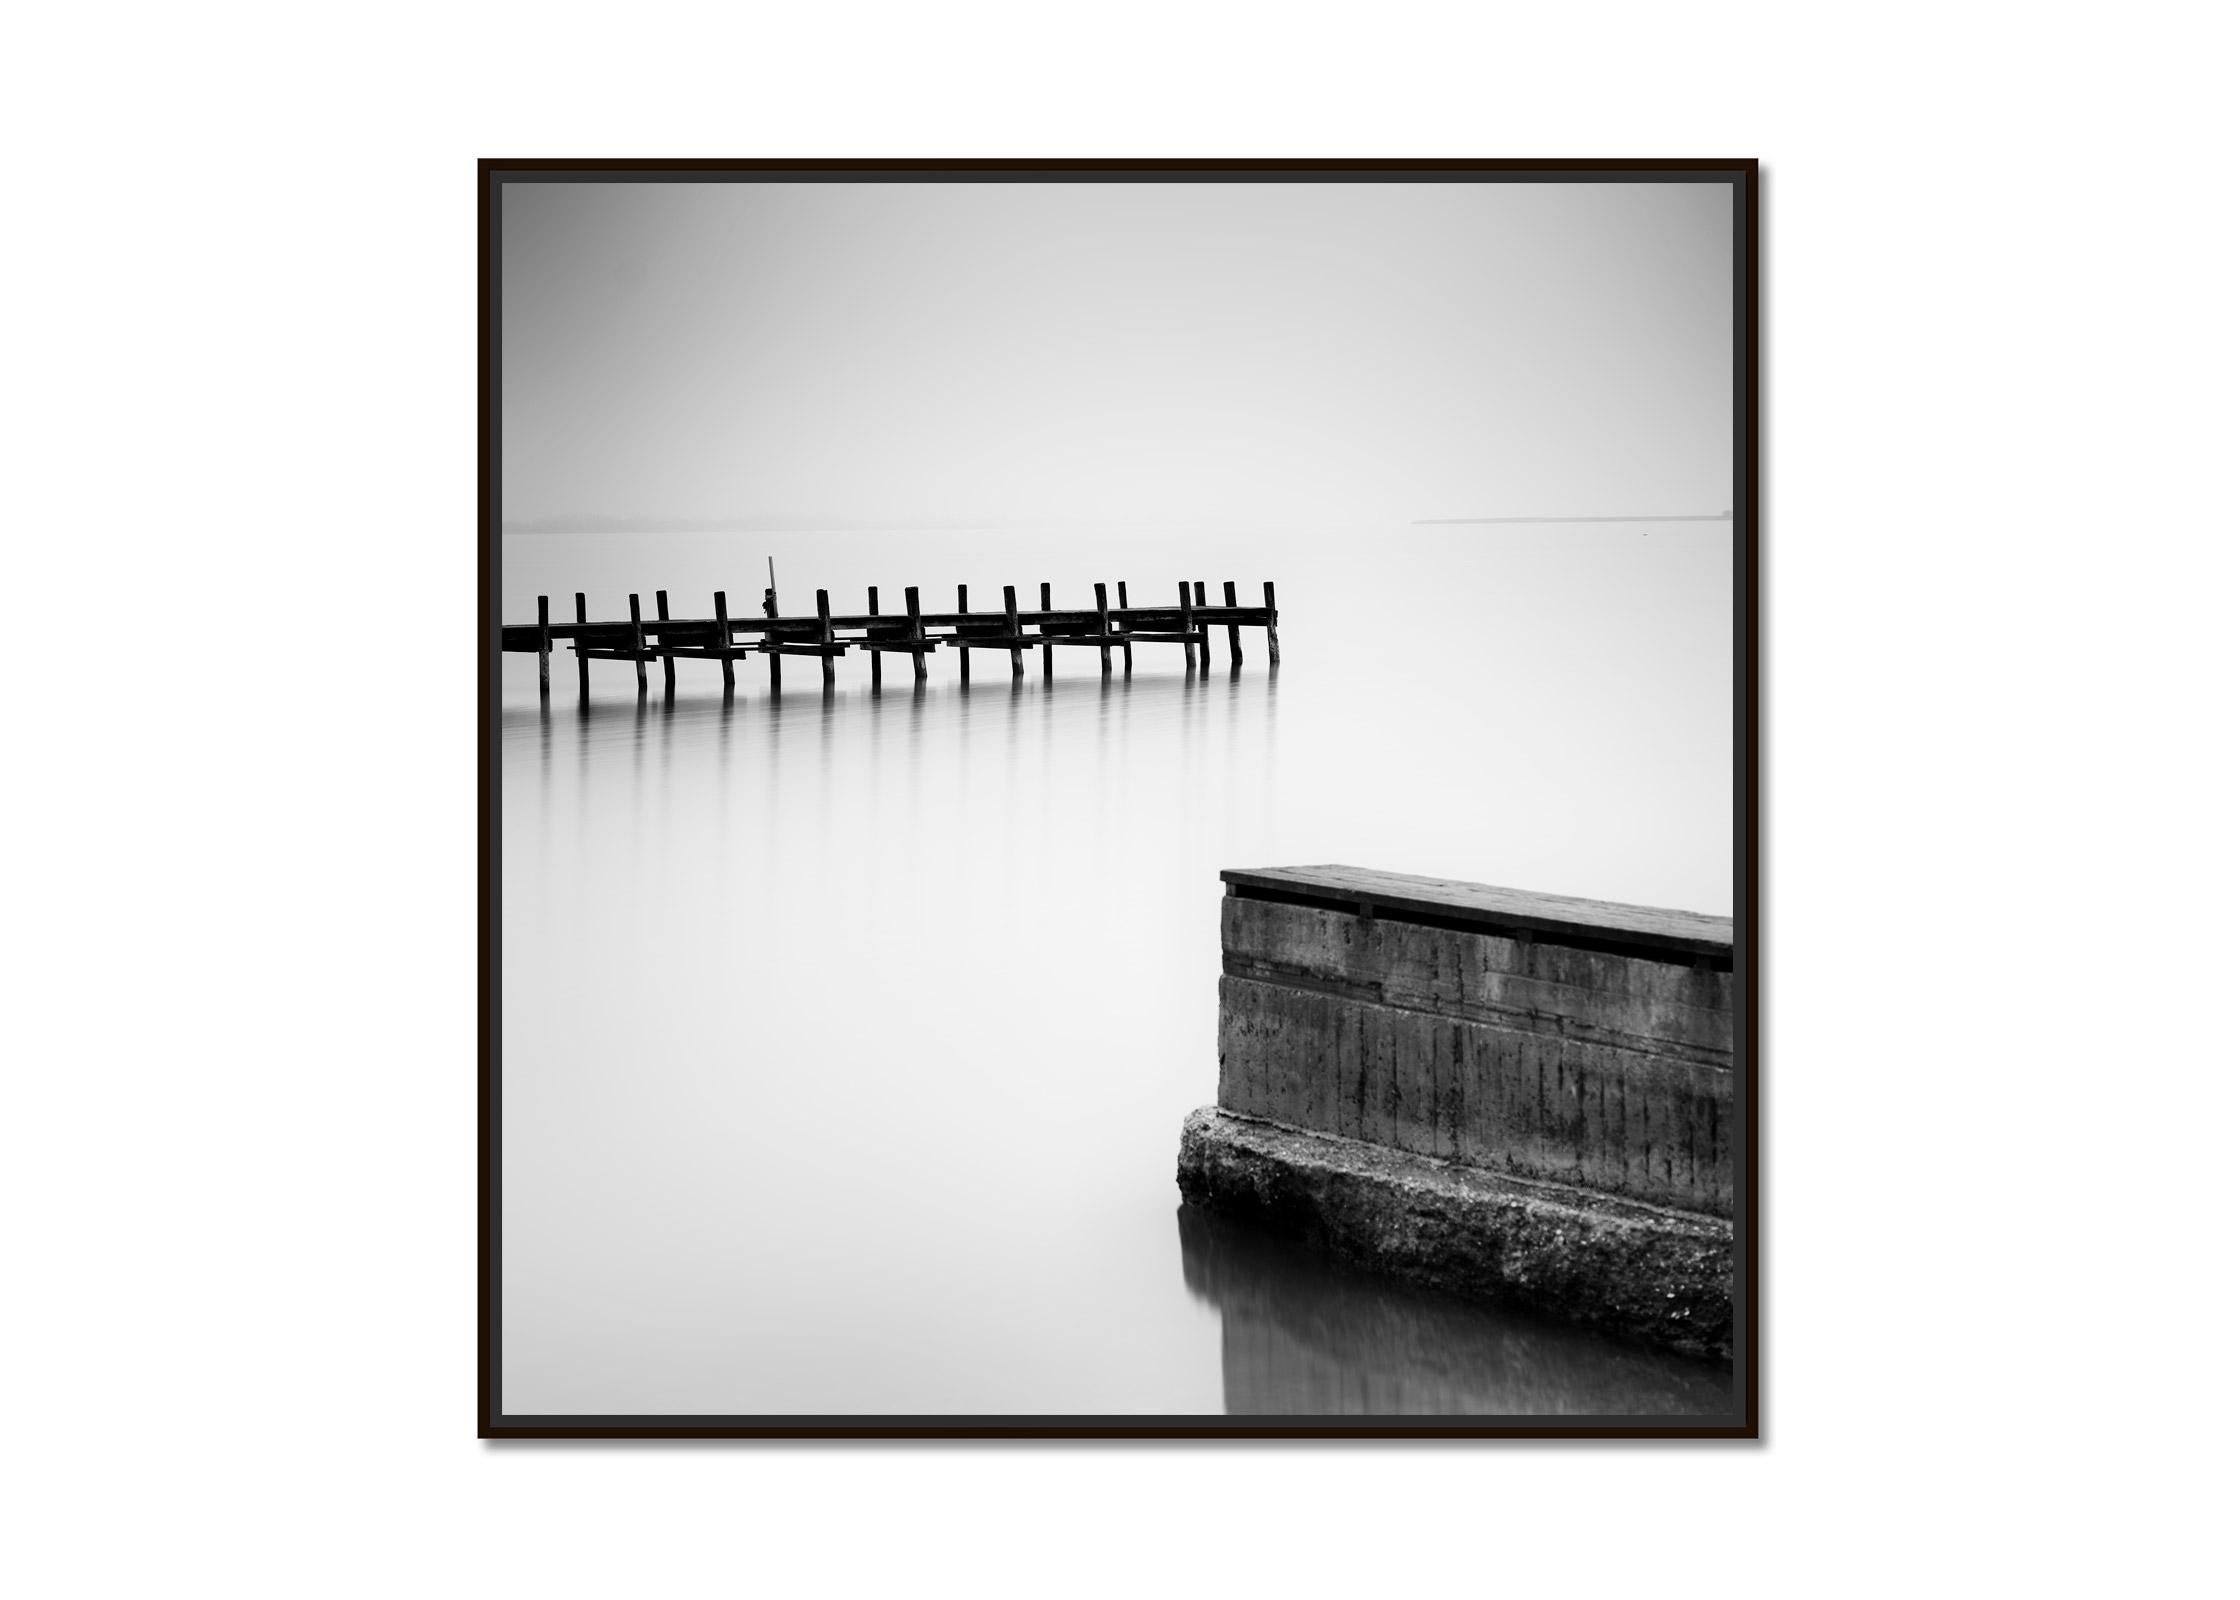 Misty morning on the Lake, Jetty, Pier, black and white photography, landscape - Photograph by Gerald Berghammer